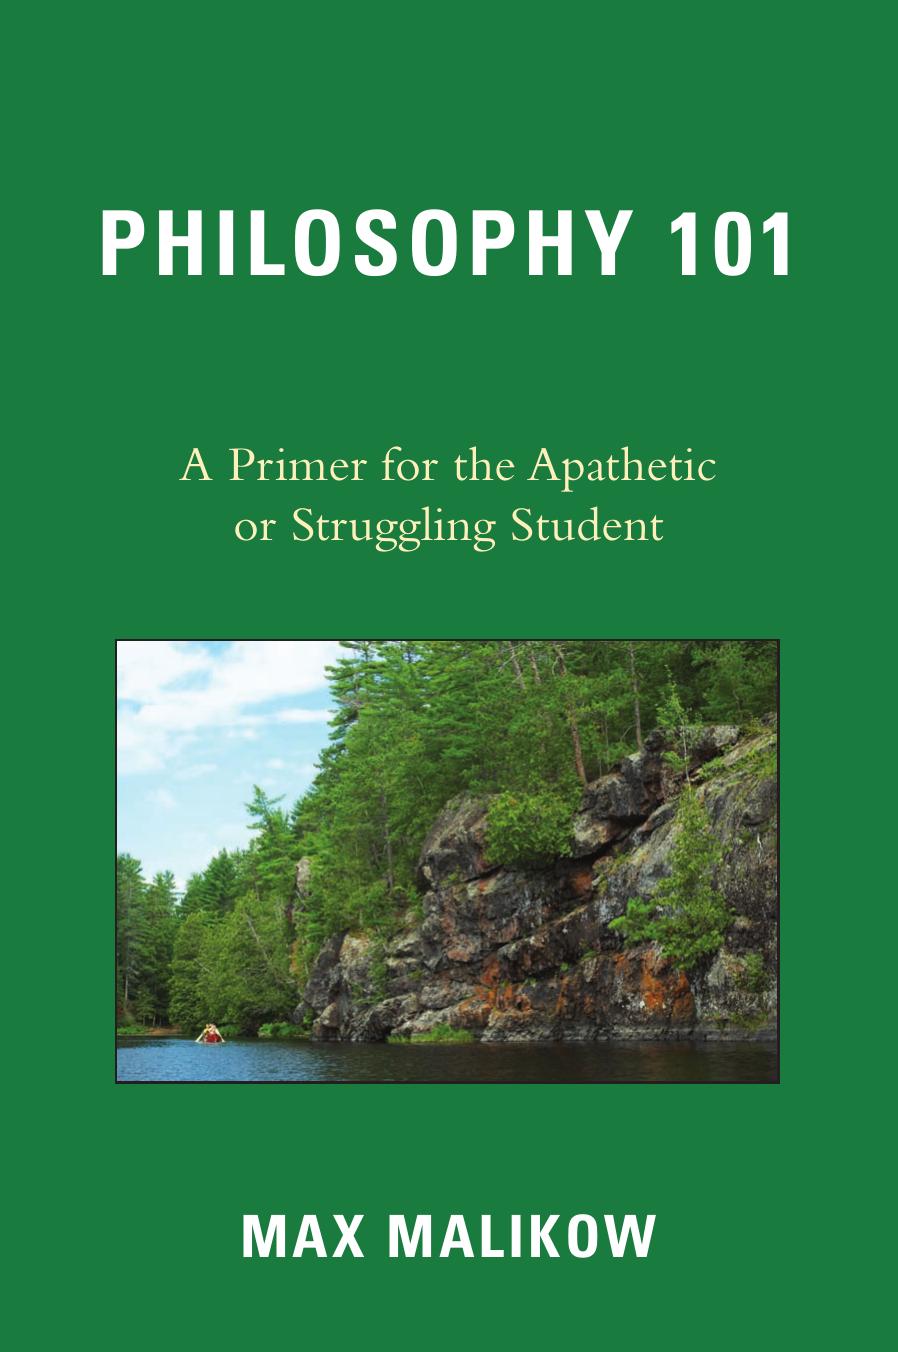 Philosophy 101: A Primer for the Apathetic or Struggling Student